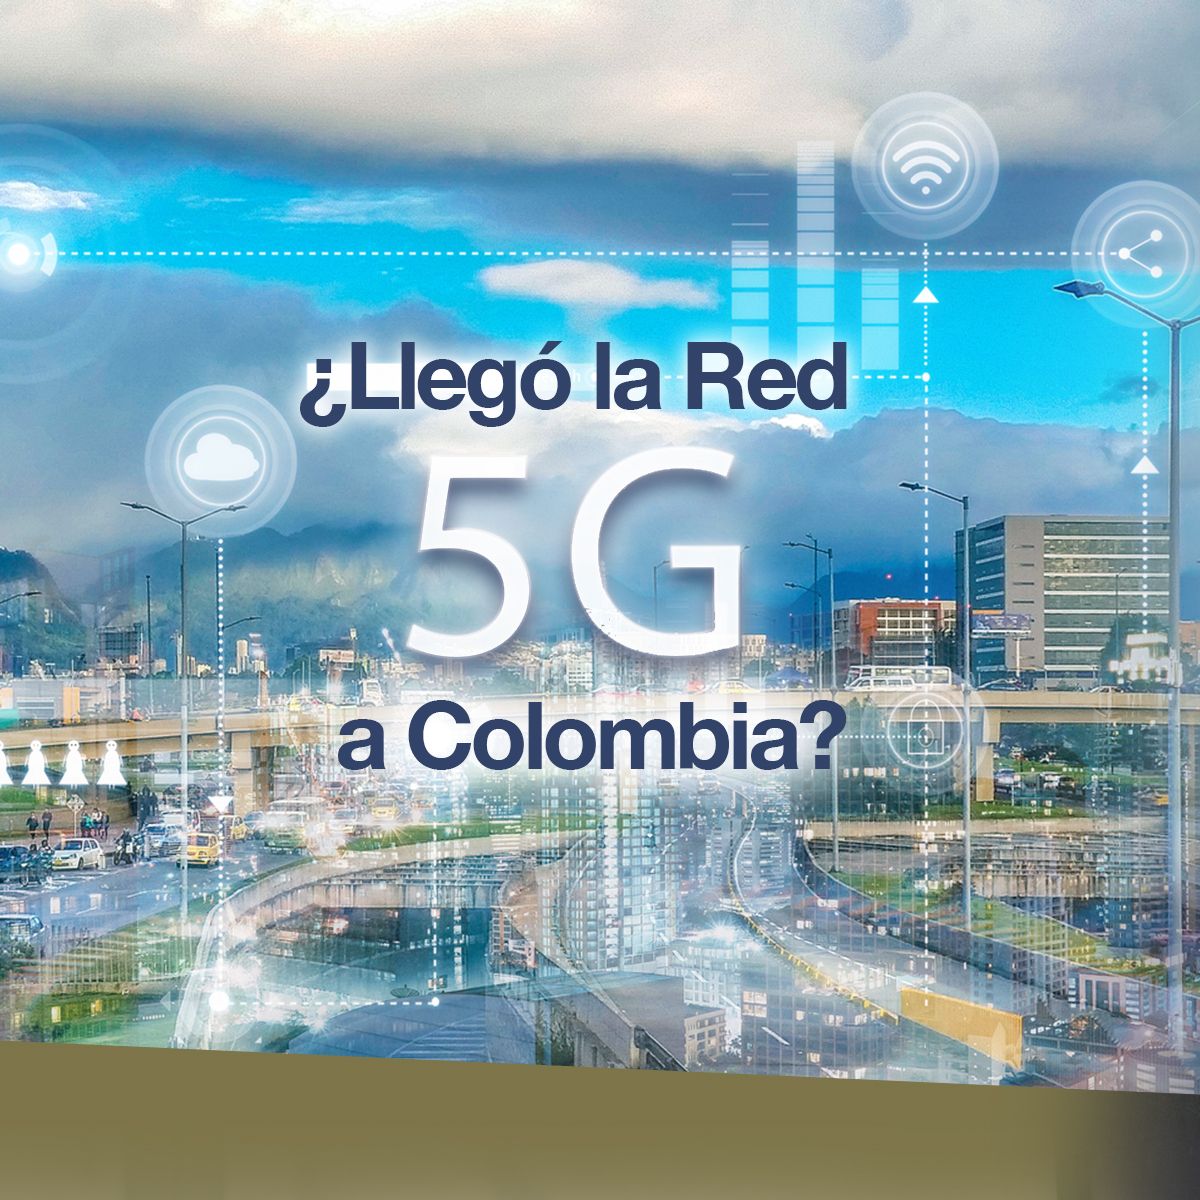 ¿Llegó la Red 5G a Colombia?